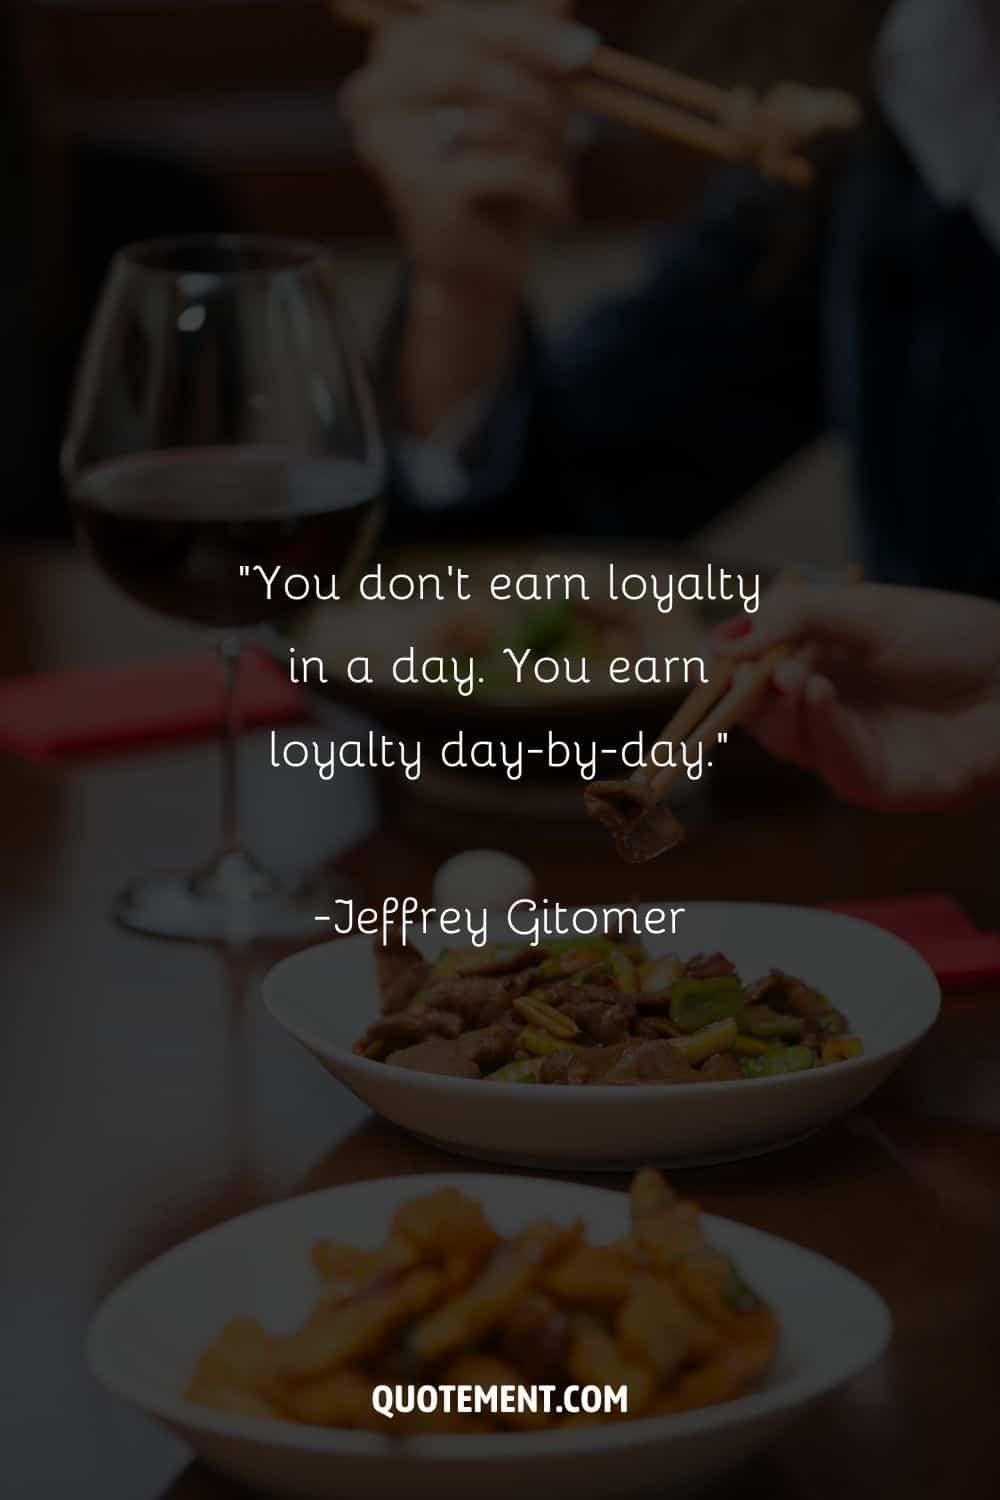 Image of people around the restaurant table representing a quote on loyalty